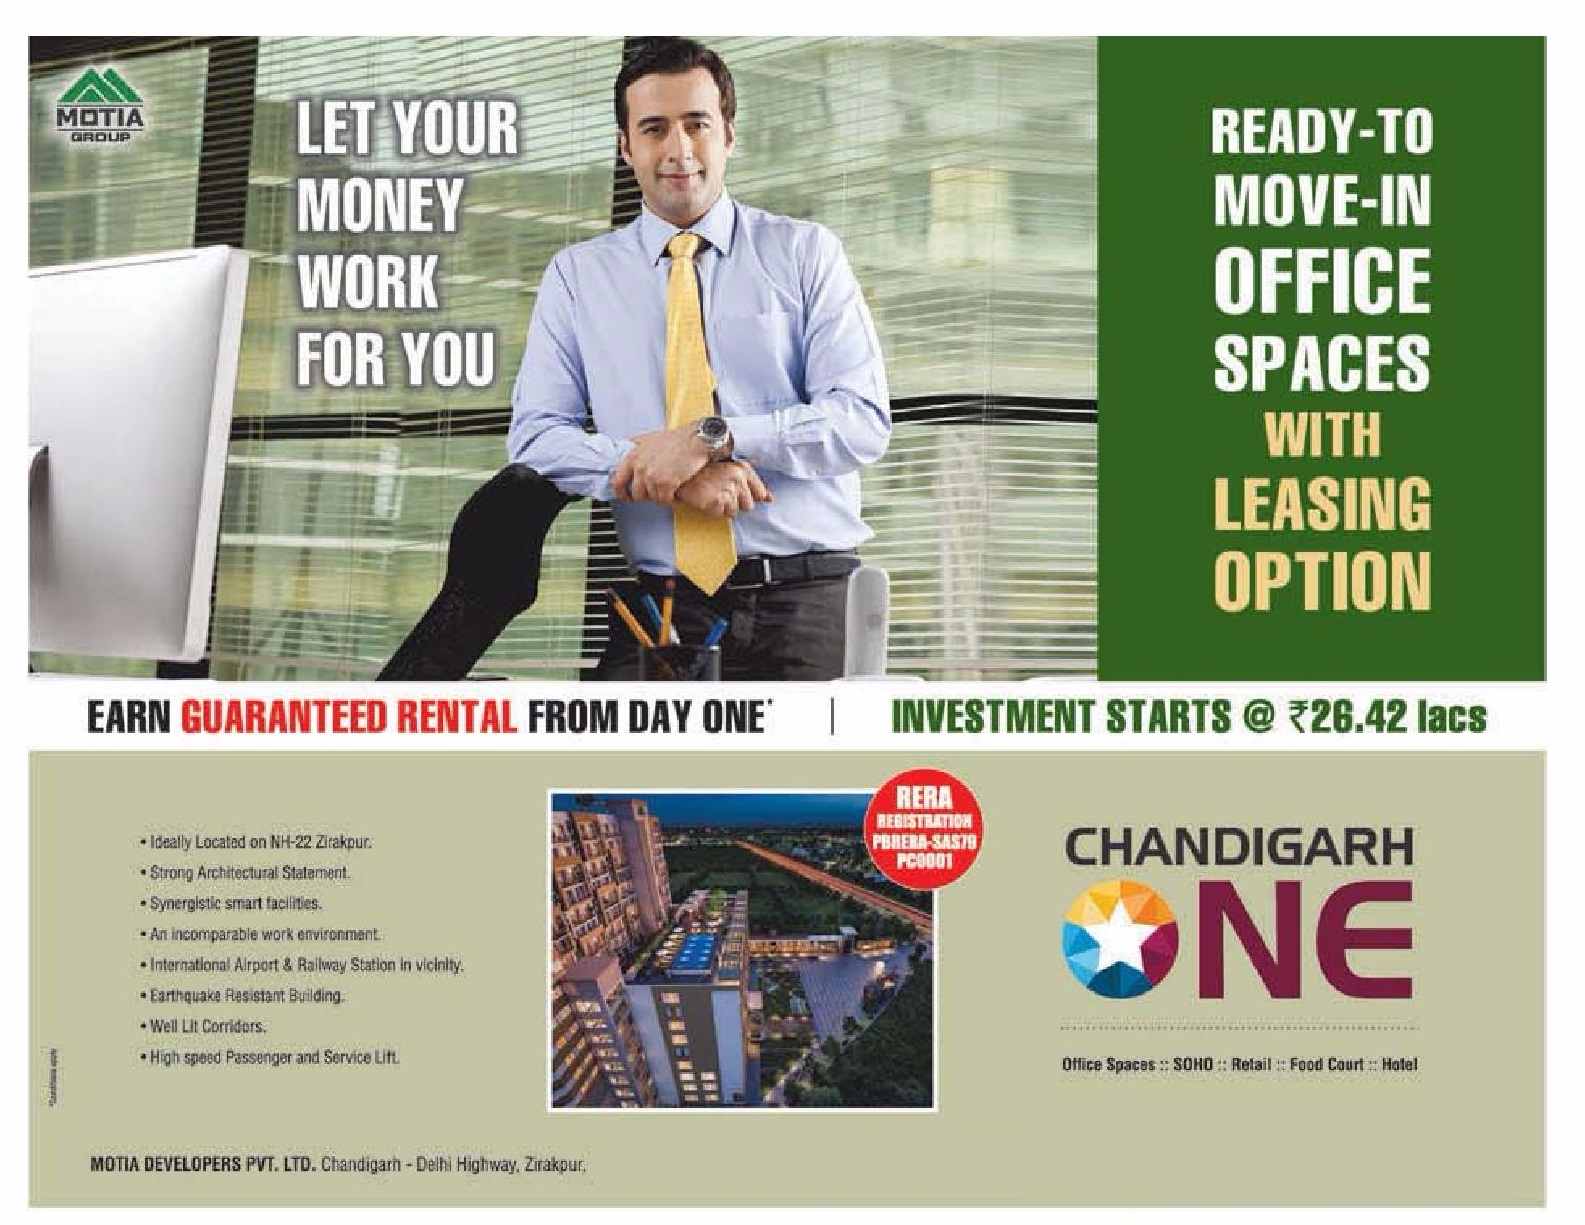 Ready to move office space with leasing option at Motia Chandigarh One in Chandigarh